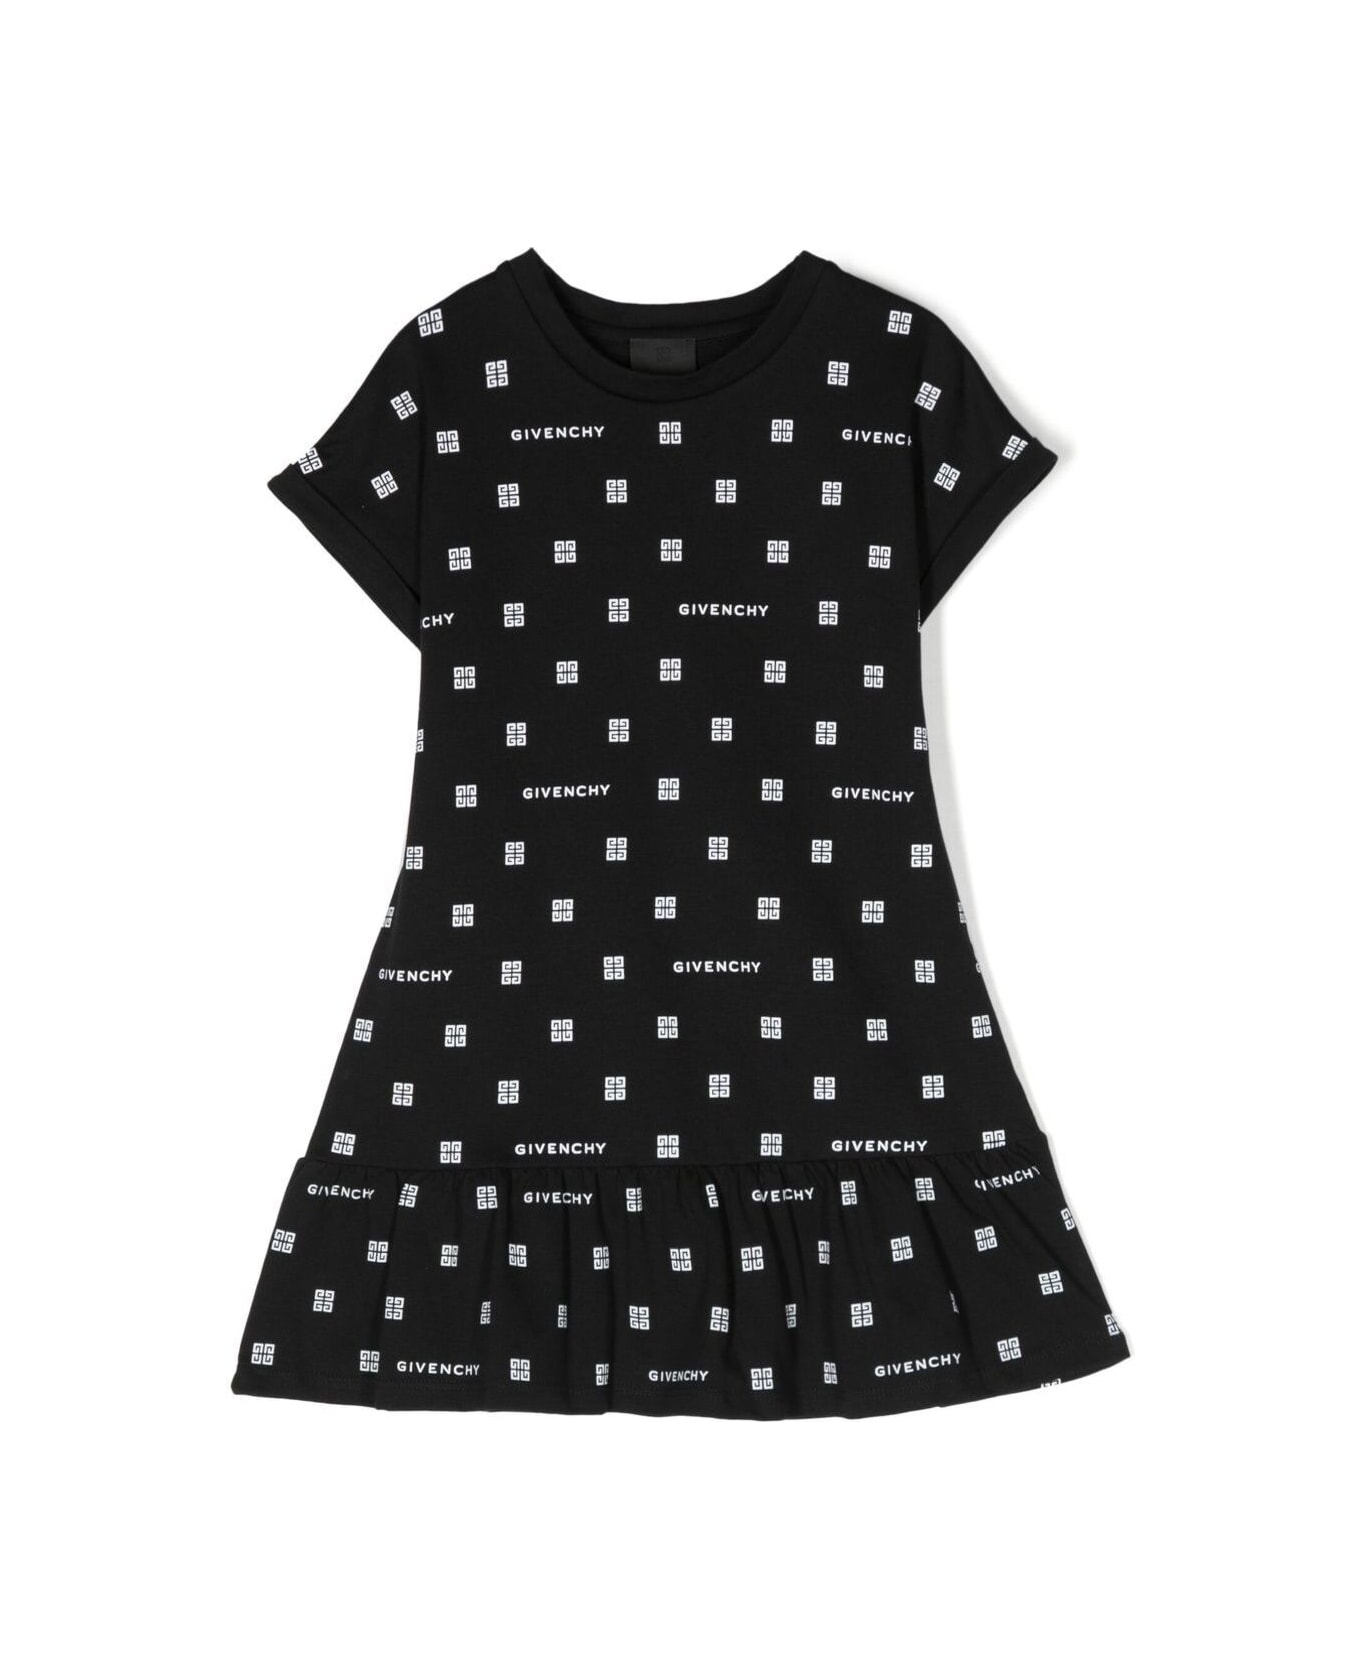 Givenchy Black Peplum Dress With 4g Logo Print All Over In Cotton Girl - Black